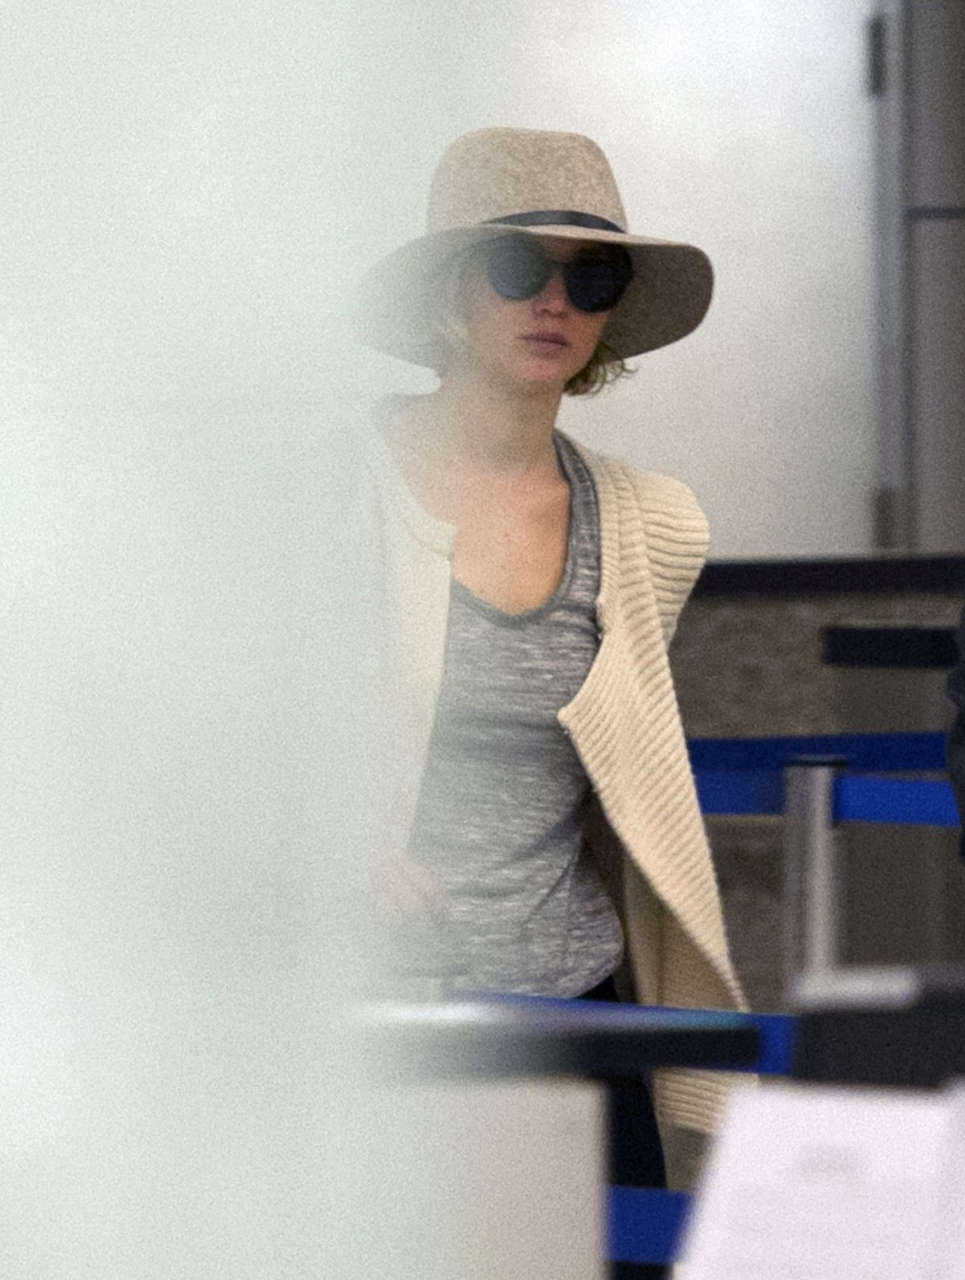 Jennifer Lawrence Hiding From Paps Lax Airport